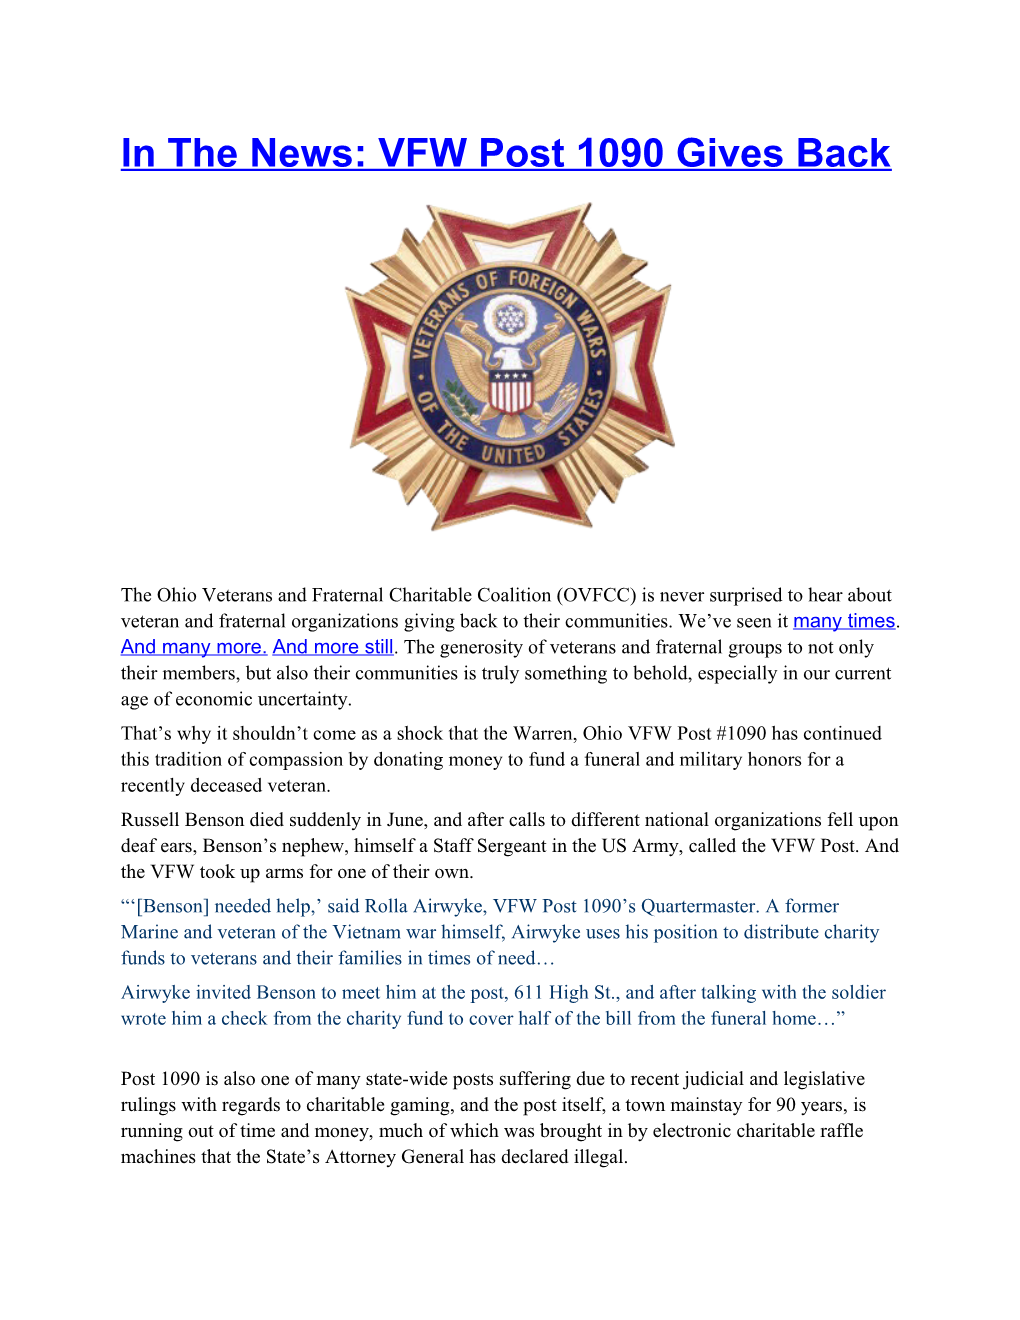 In the News: VFW Post 1090 Gives Back